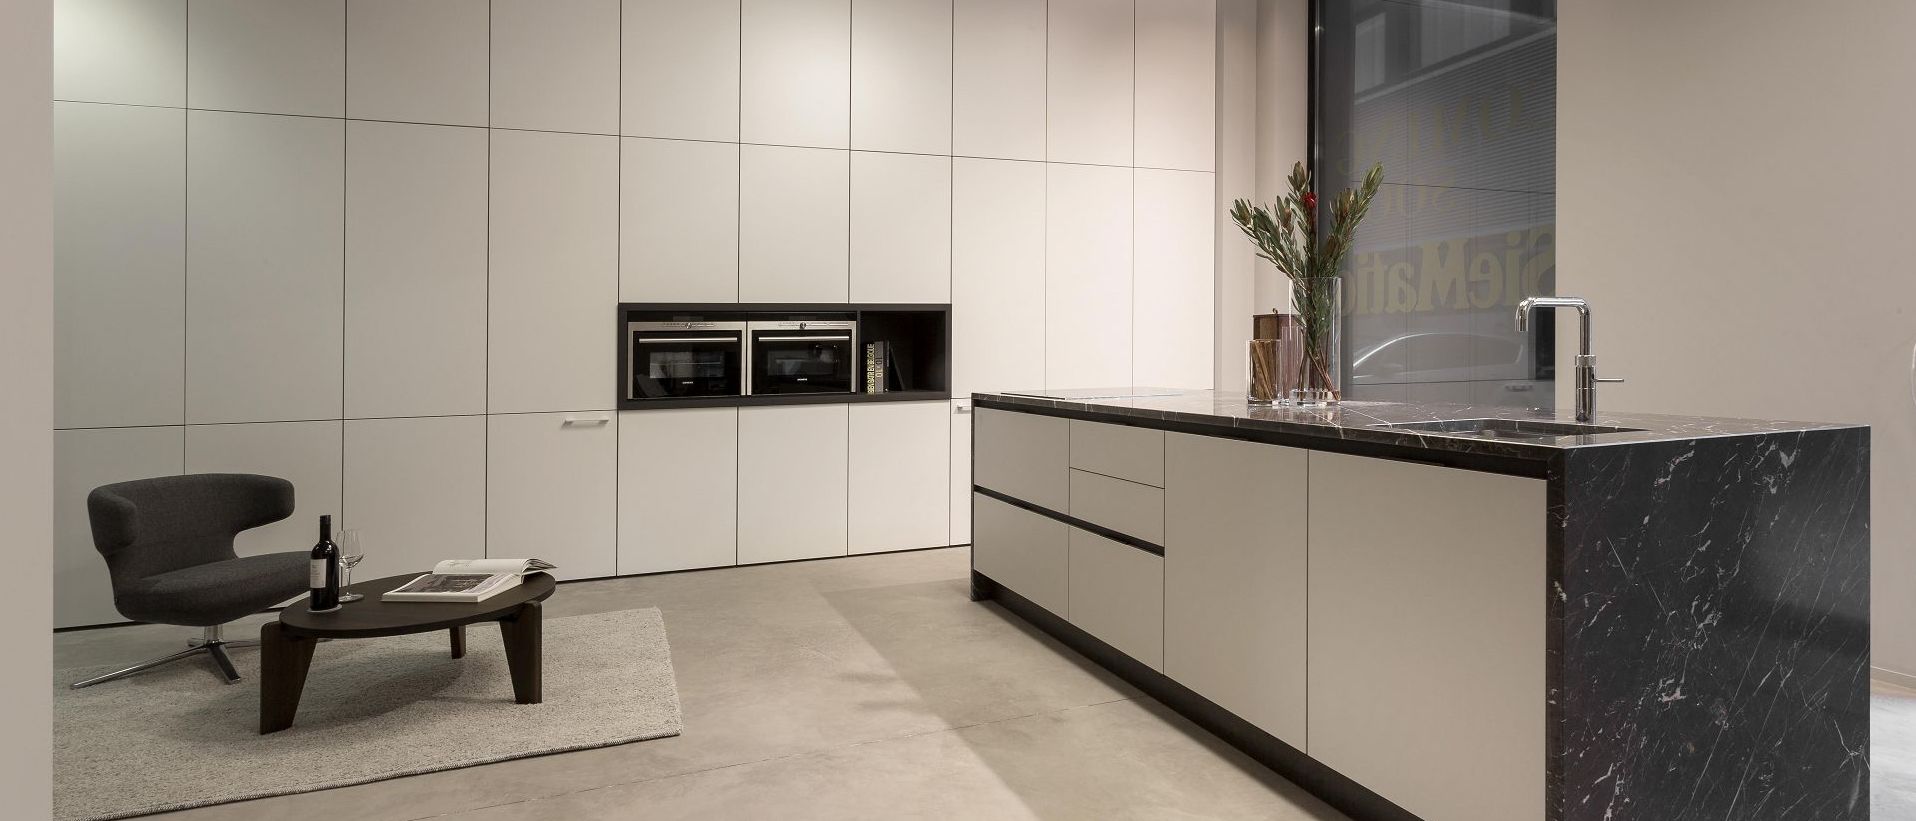 SieMatic kitchen showrooms: Visit a SieMatic partner near you